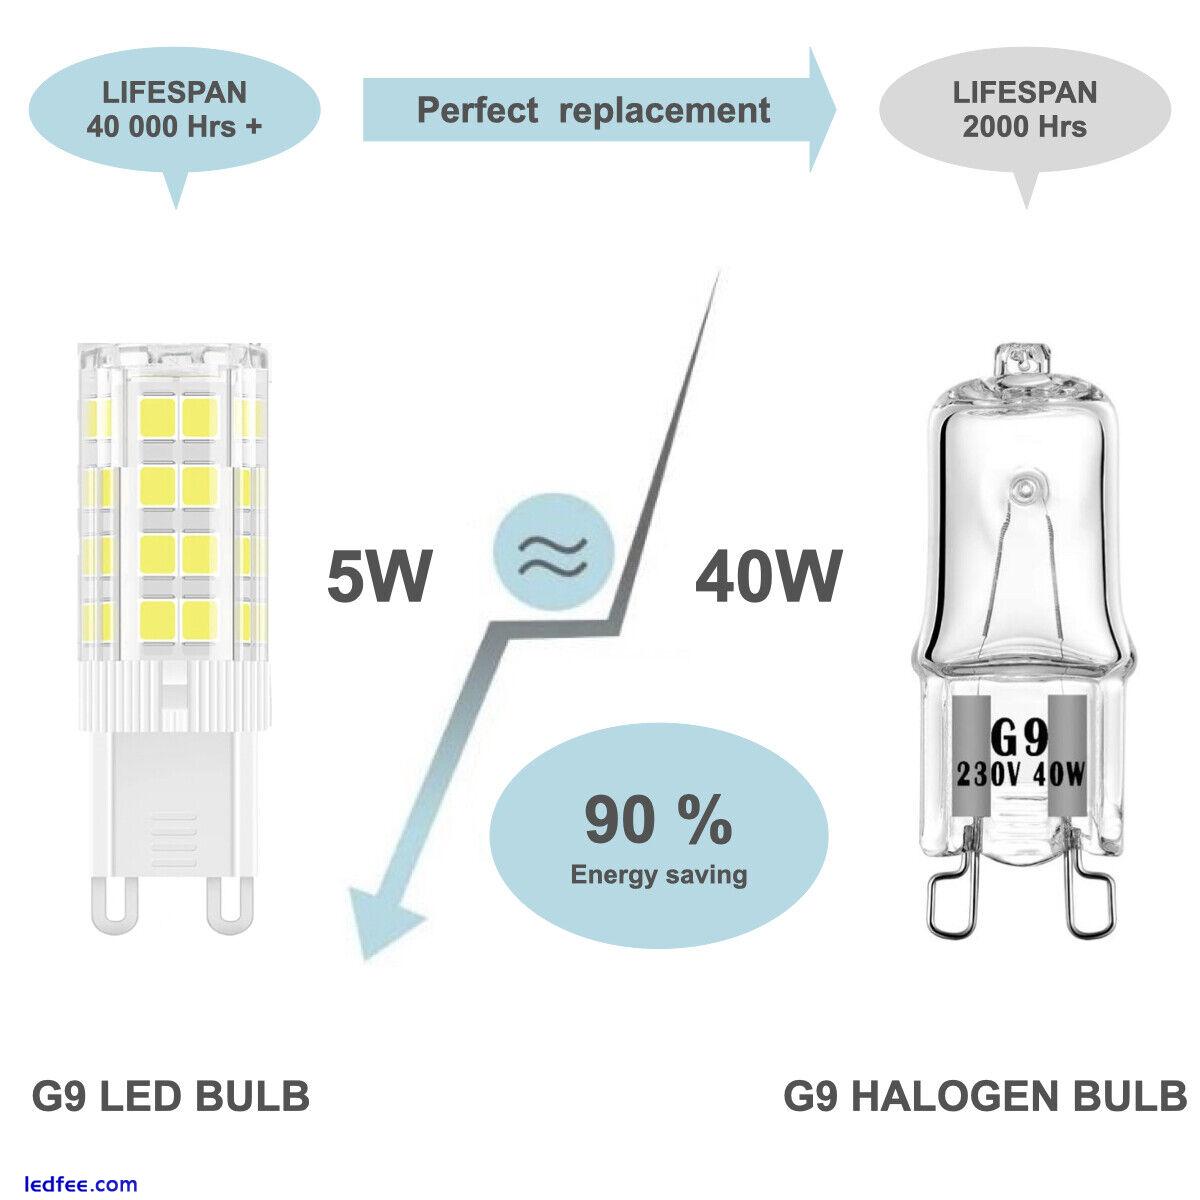 LED Light Bulbs G9 3W | 5W SMD2835 Replacement For G9 Halogen Capsule Bulbs 3 